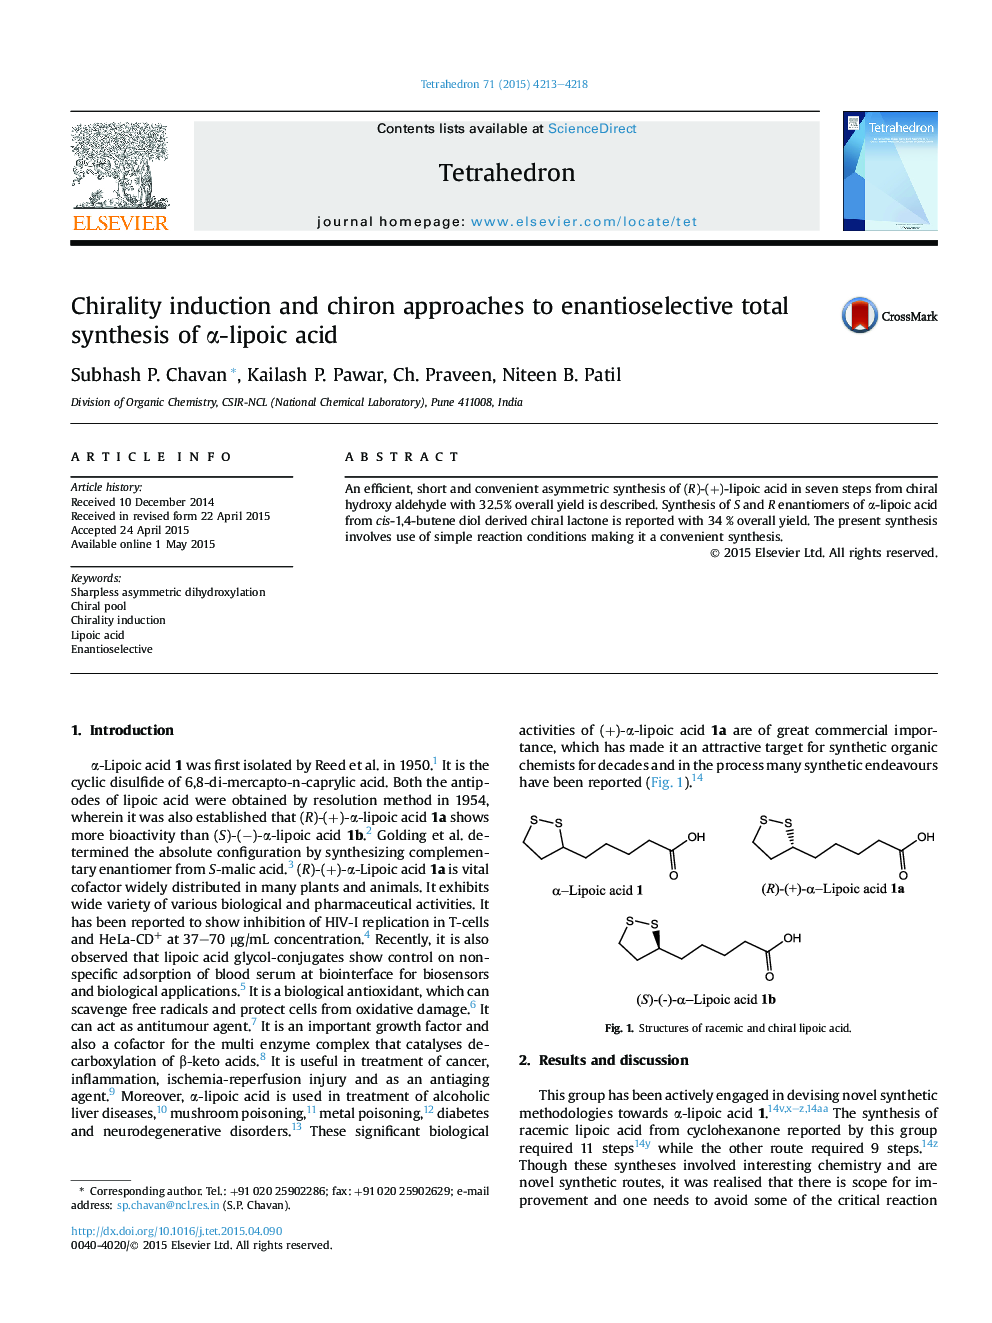 Chirality induction and chiron approaches to enantioselective total synthesis of Î±-lipoic acid